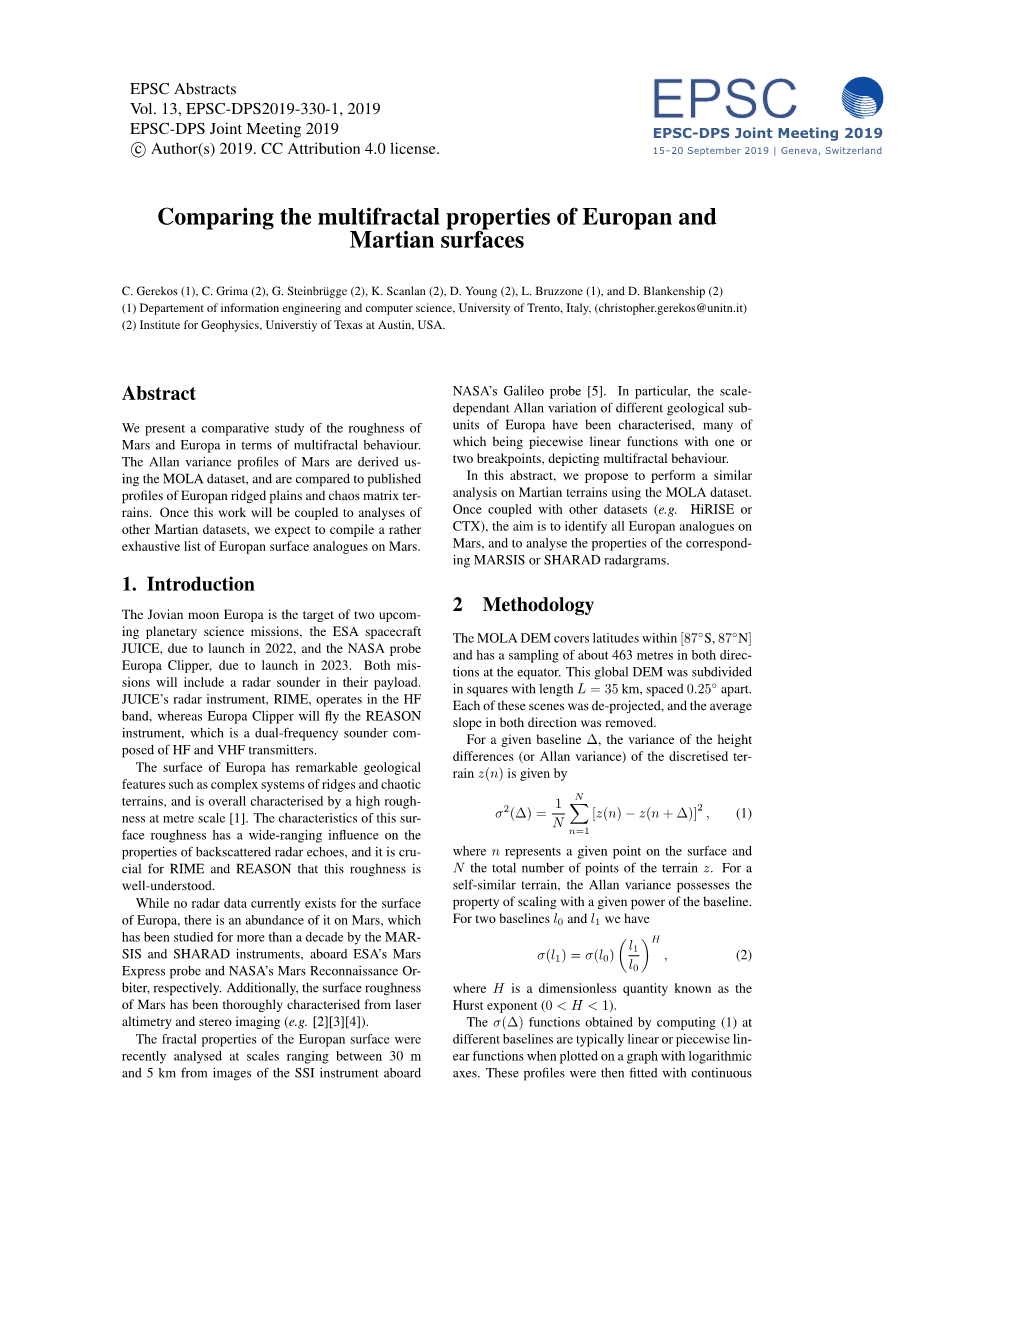 Comparing the Multifractal Properties of Europan and Martian Surfaces